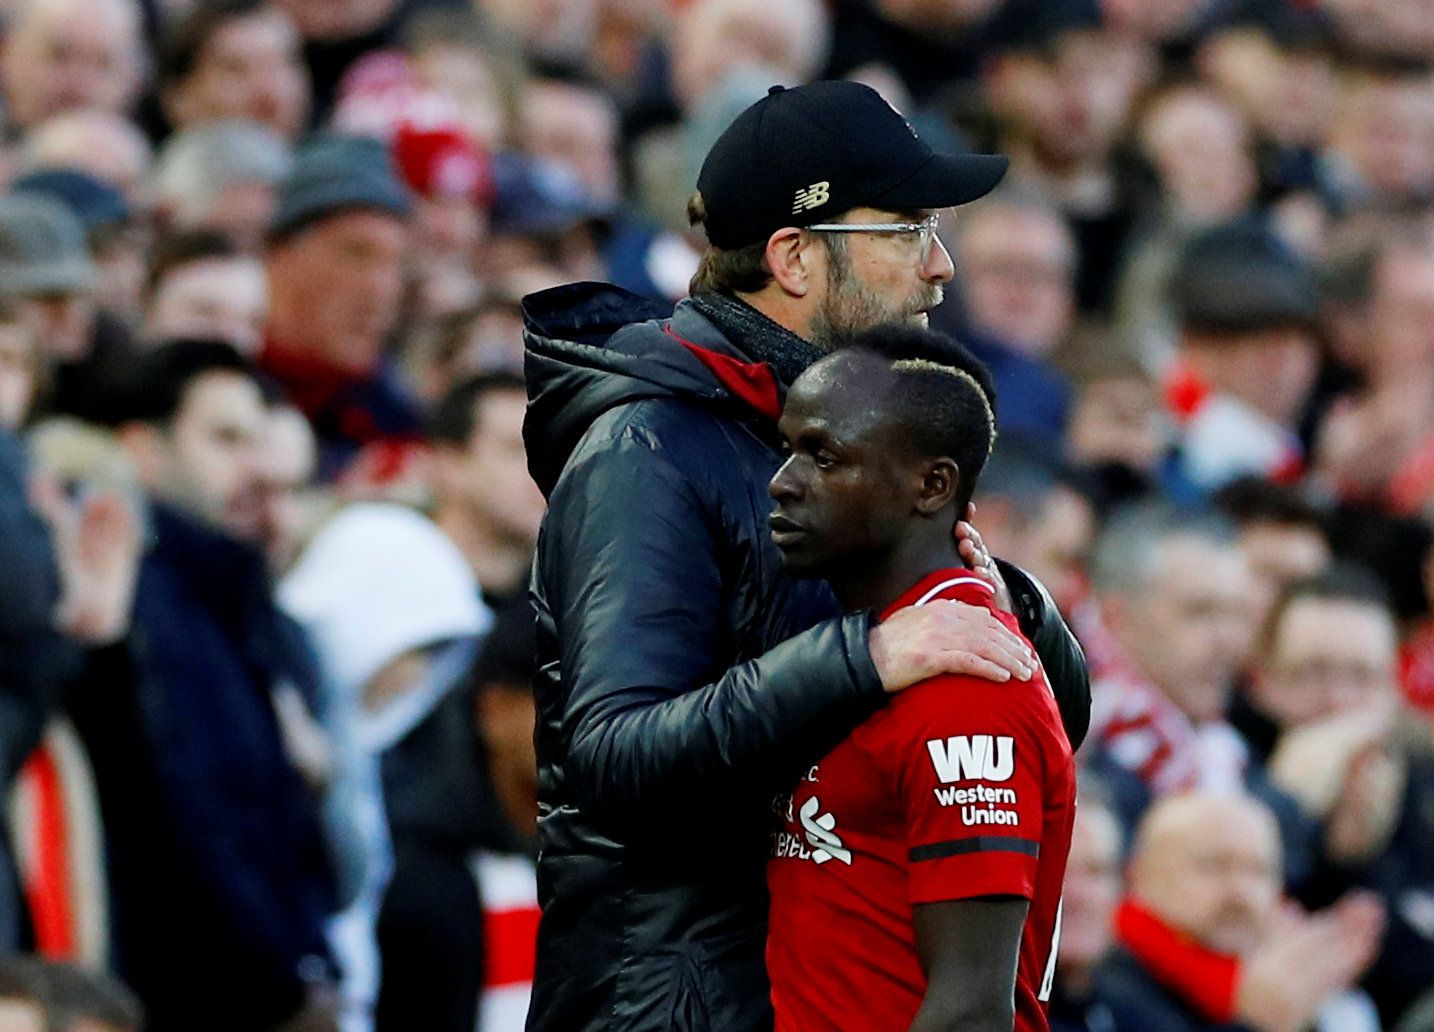 Soccer Football - Premier League - Liverpool v AFC Bournemouth - Anfield, Liverpool, Britain - February 9, 2019  Liverpool manager Juergen Klopp looks on as Liverpool's Sadio Mane is substituted off                 REUTERS/Phil Noble  EDITORIAL USE ONLY. No use with unauthorized audio, video, data, fixture lists, club/league logos or "live" services. Online in-match use limited to 75 images, no video emulation. No use in betting, games or single club/league/player publications.  Please contact y